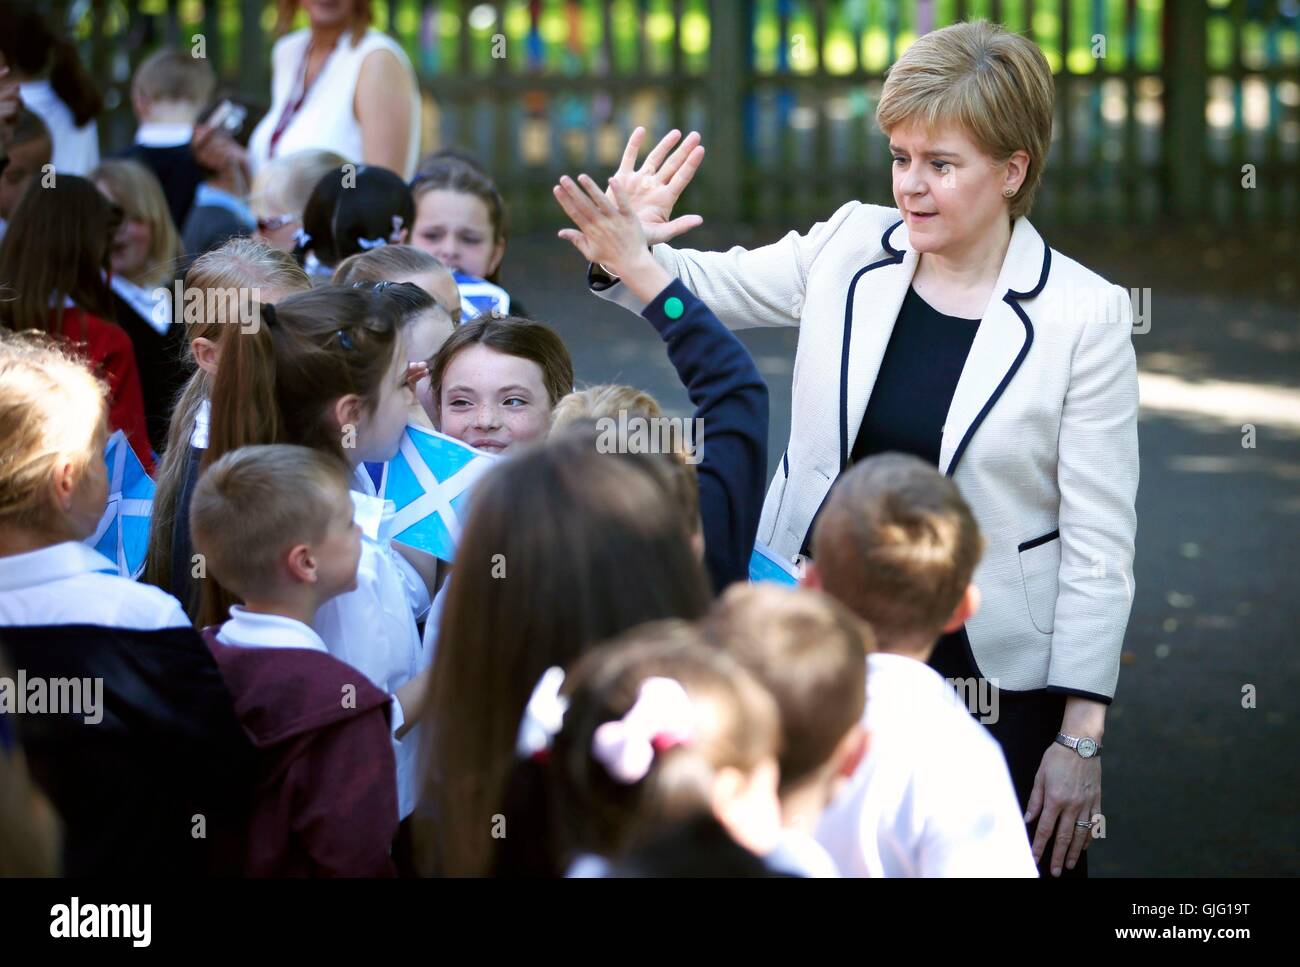 First Minister Nicola Sturgeon meets P5 and P6 pupils during a visit to Burnfoot Community School, Hawick, to announce funding to raise educational attainment in deprived areas. Stock Photo